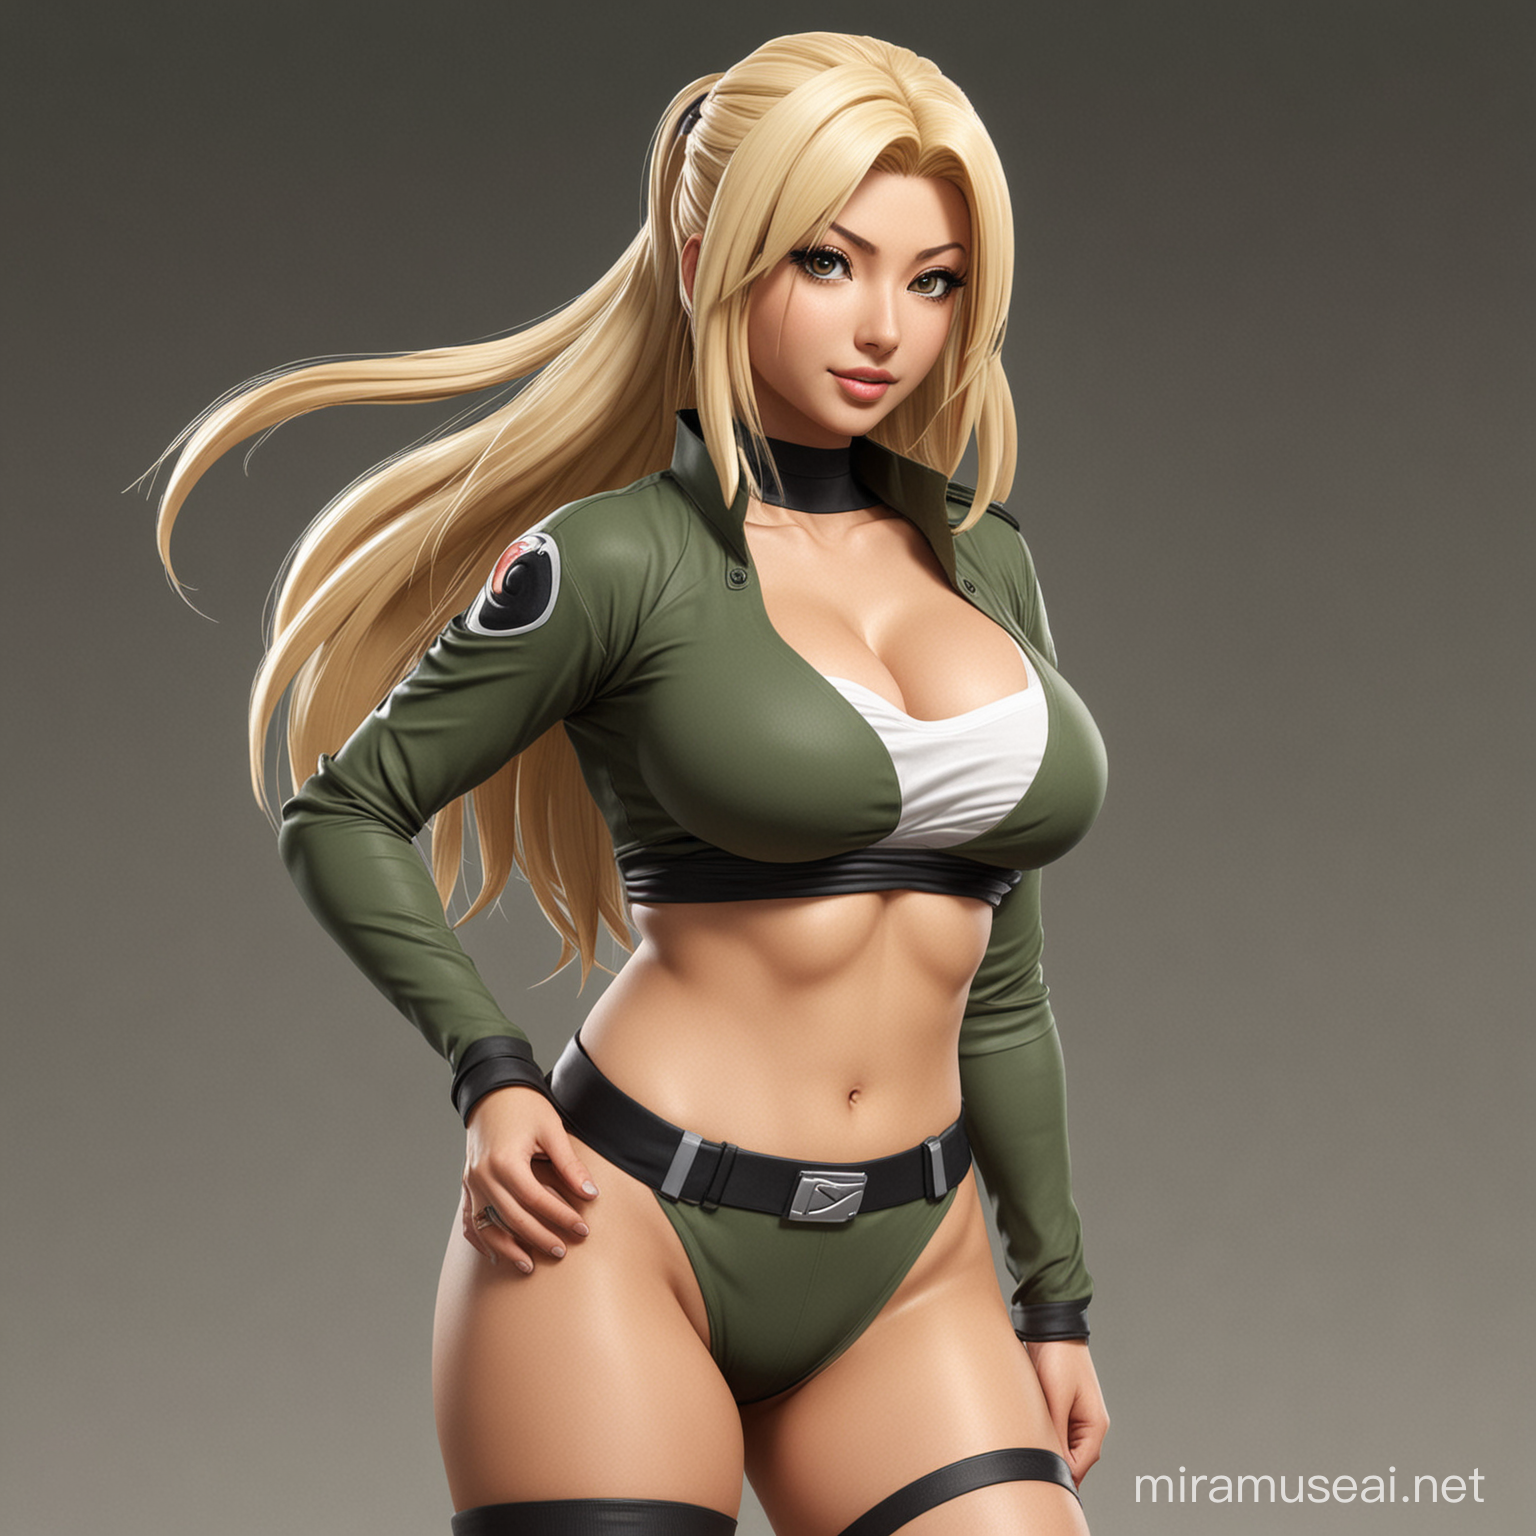 Photorealistic full length picture of Ayesha Takia as tsunade in a scene from the anime naruto. the scene is shown as similar to a point in the anime storyline as possible. In the scene tsunade is in her signature revealing hokage attire showing off massive cleavage.  The finish is realistic and shows the curves of her body correctly.
